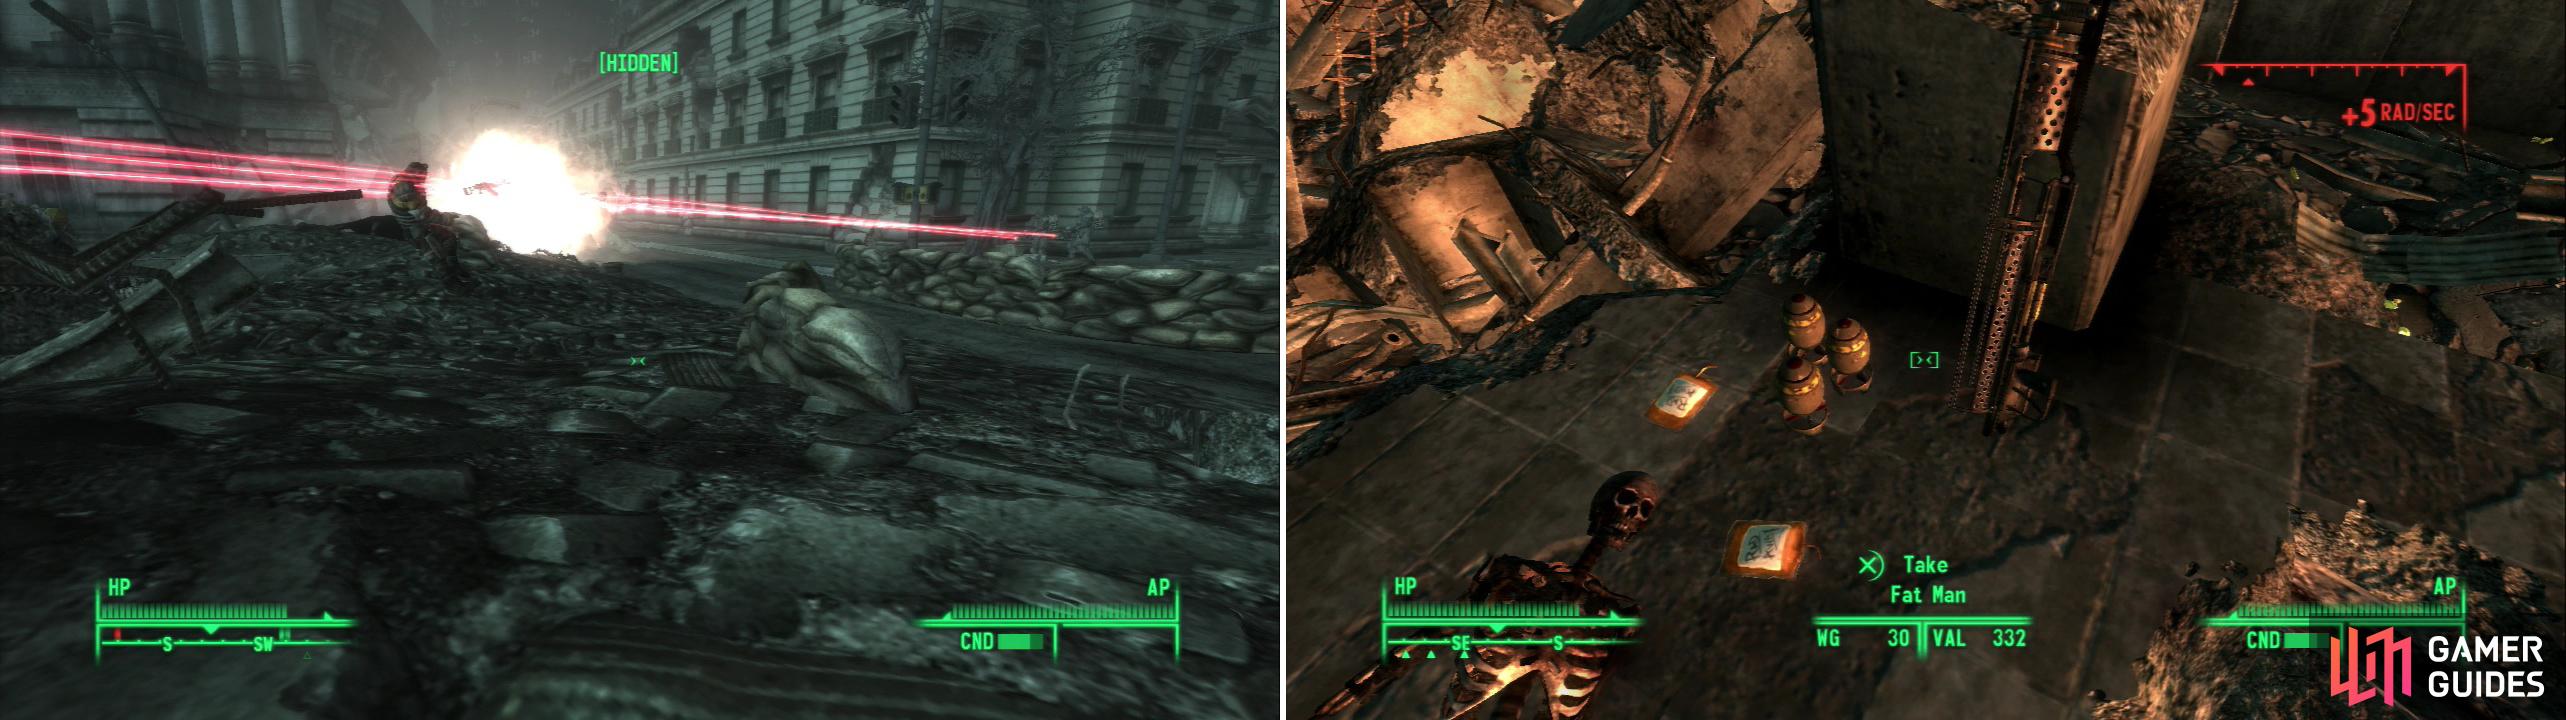 The Brotherhood defends their position in Pennsylvania Avenue (left). Brave the heat to score some loot near the ruins of the White House (right).